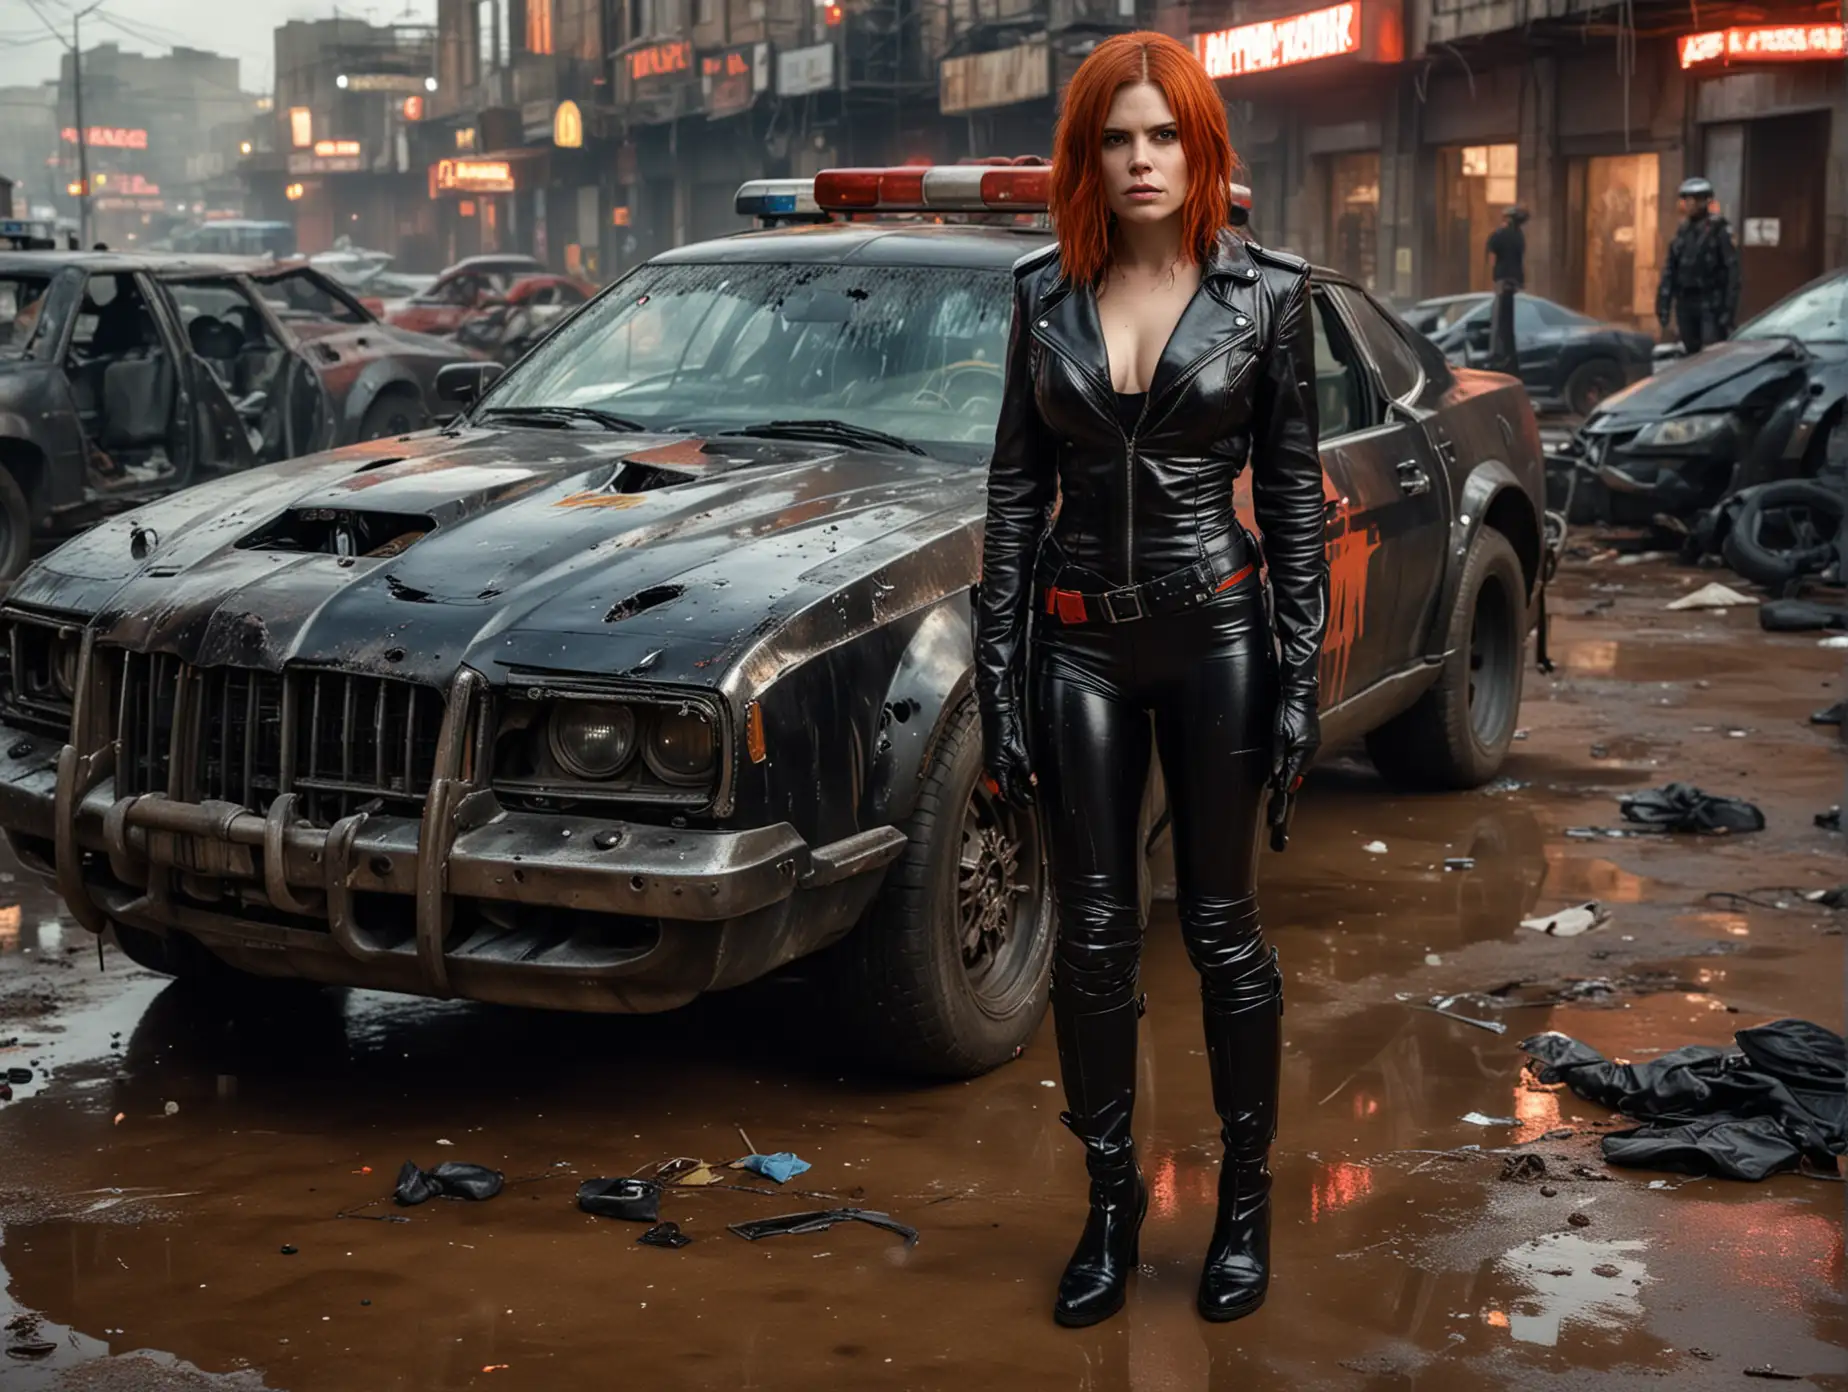 Cyberpunk-Police-Officer-with-Red-Hair-in-Urban-Apocalypse-Scene